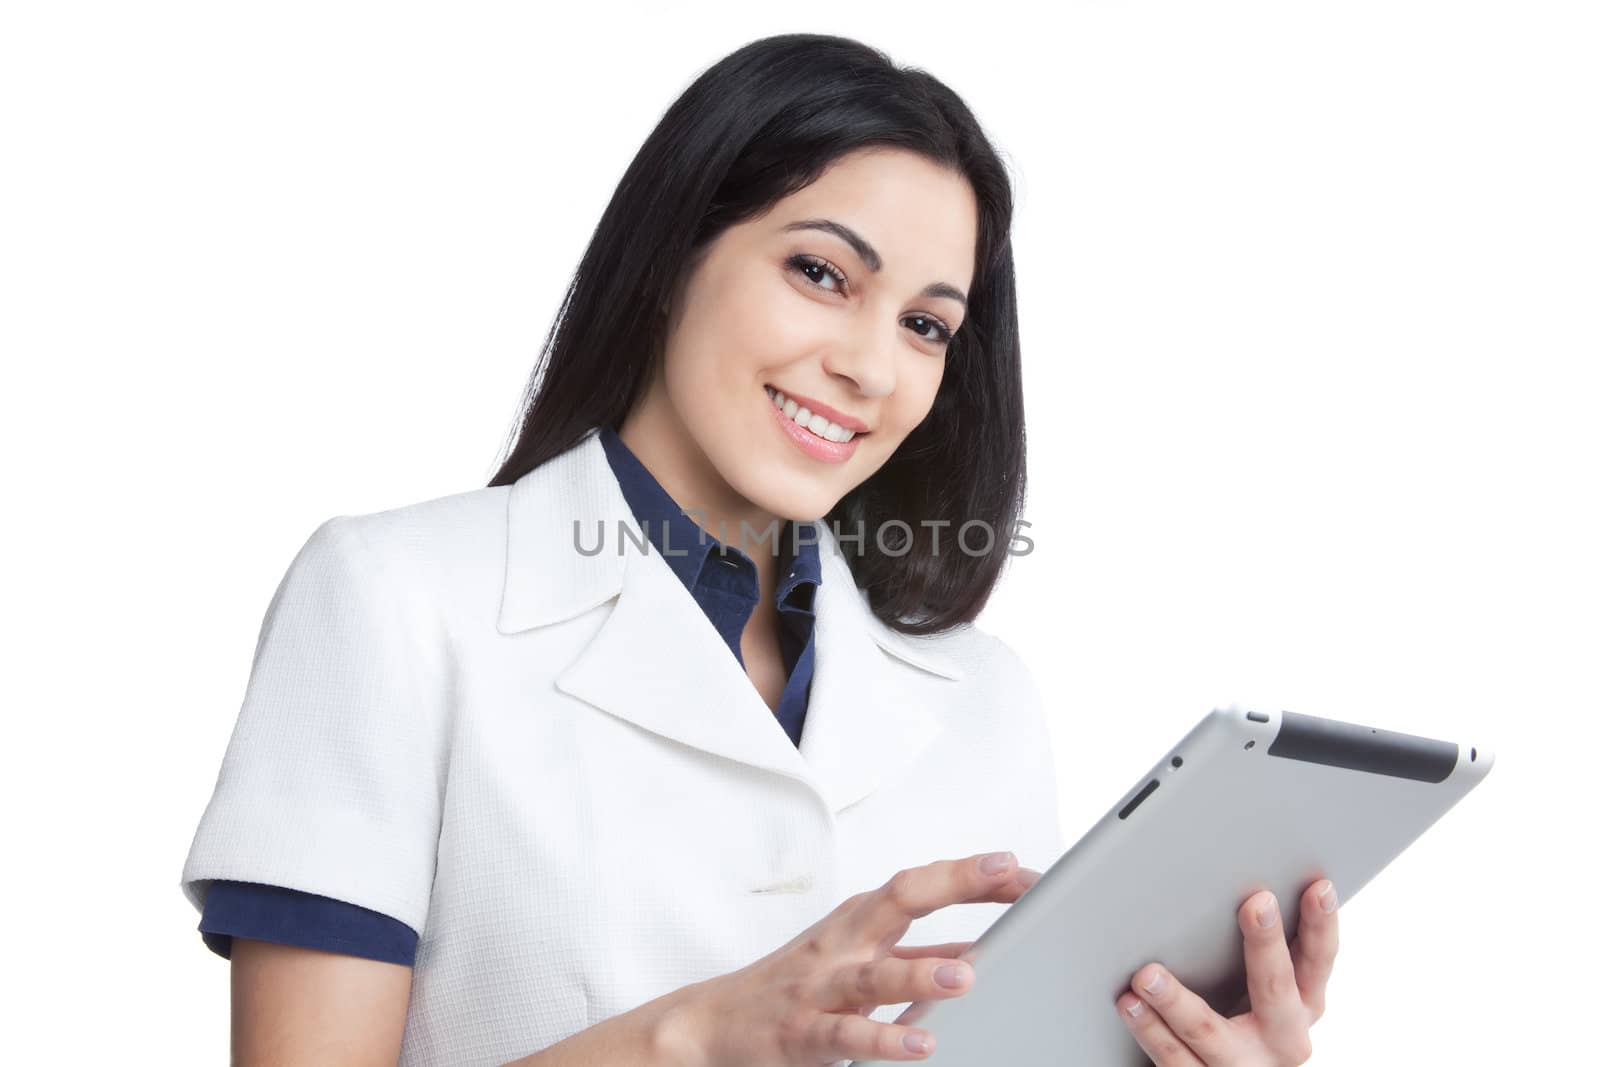 Portrait of young woman using digital tablet isolated on white background.